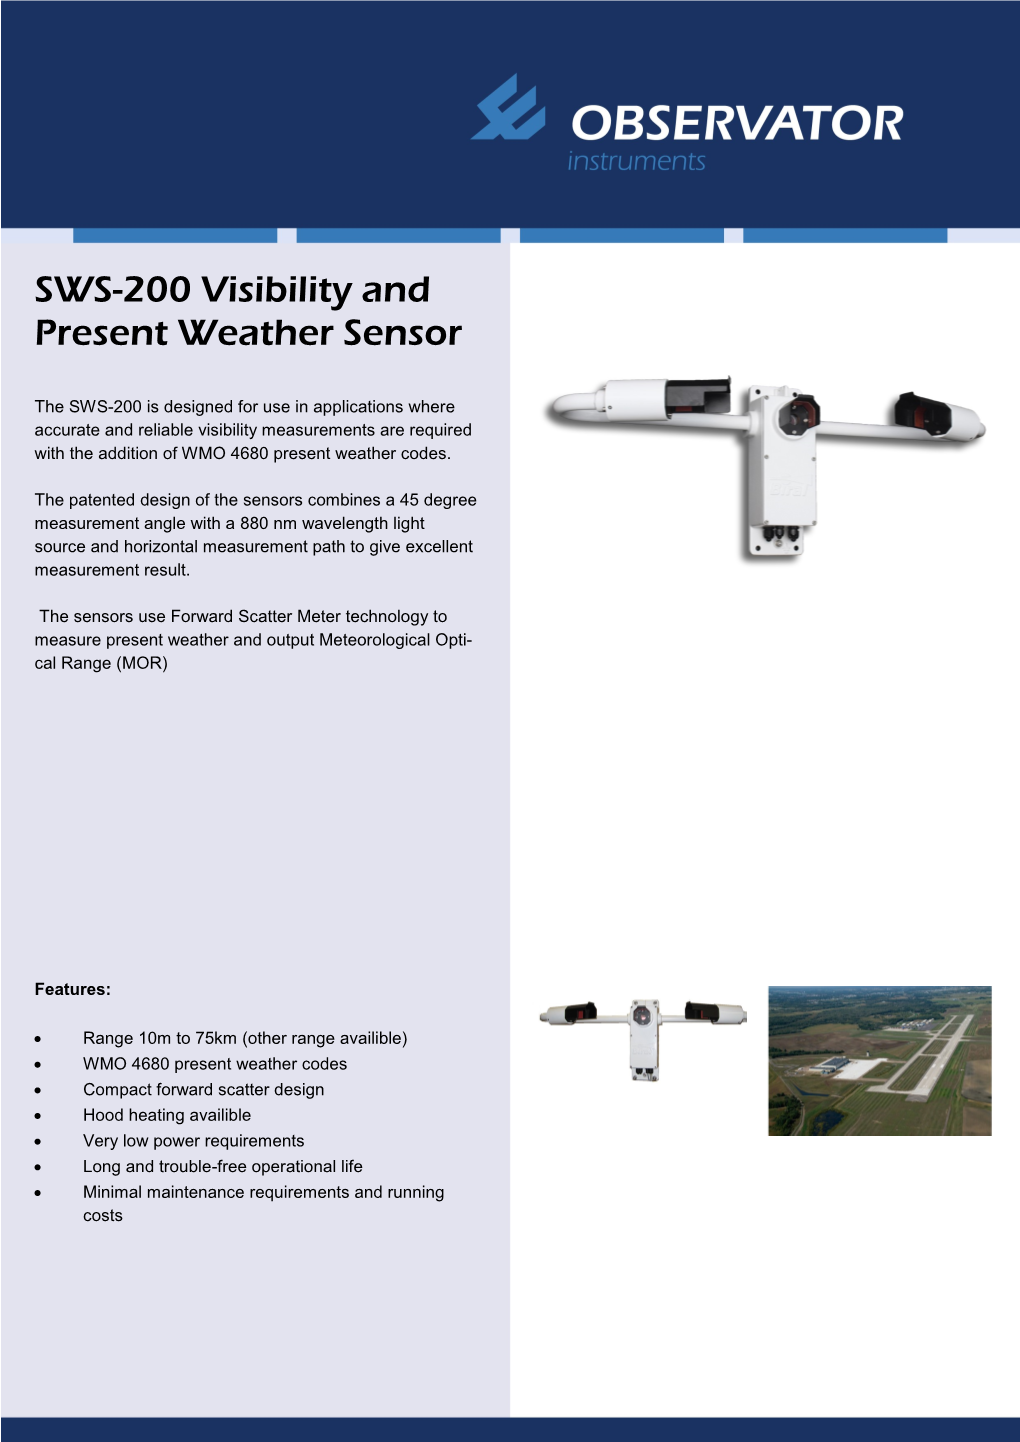 SWS-200 Visibility and Present Weather Sensor